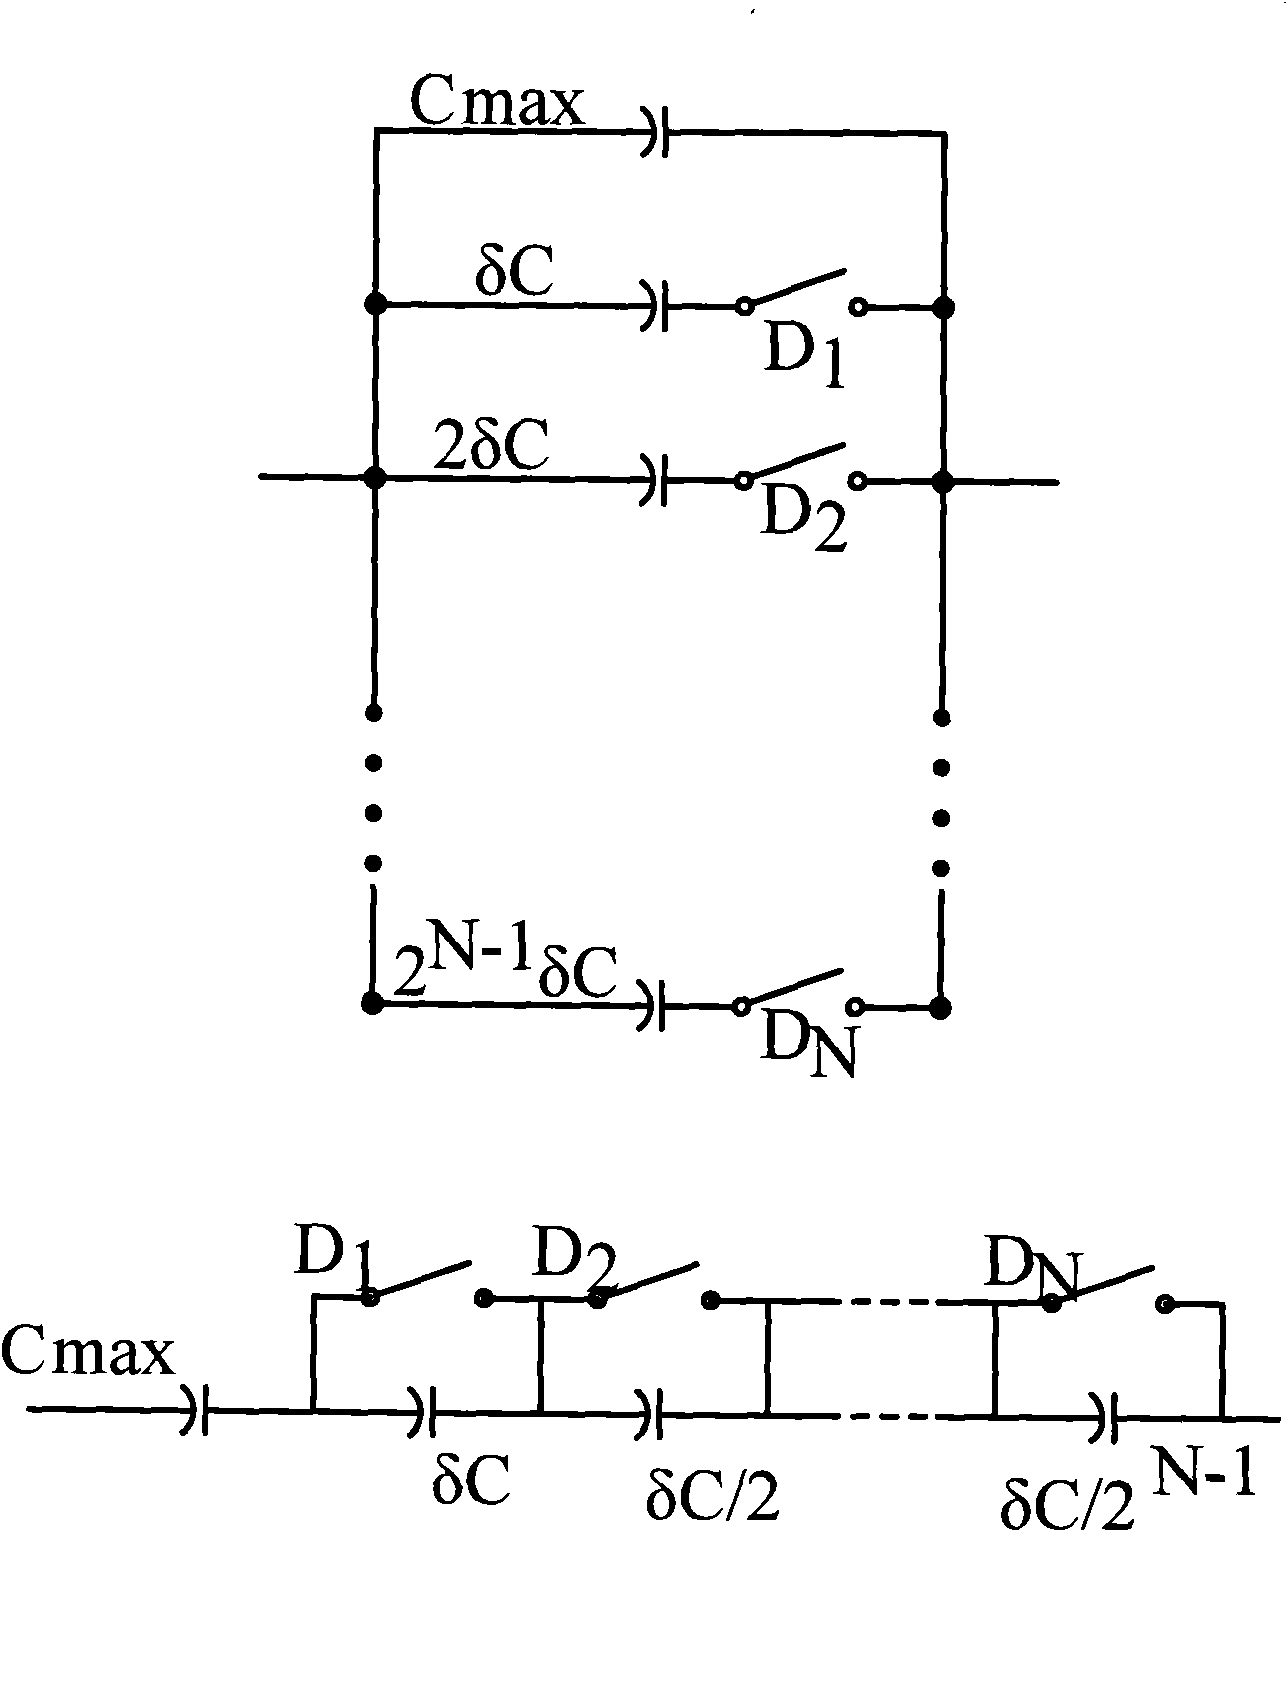 Cutoff frequency correction circuit of filter